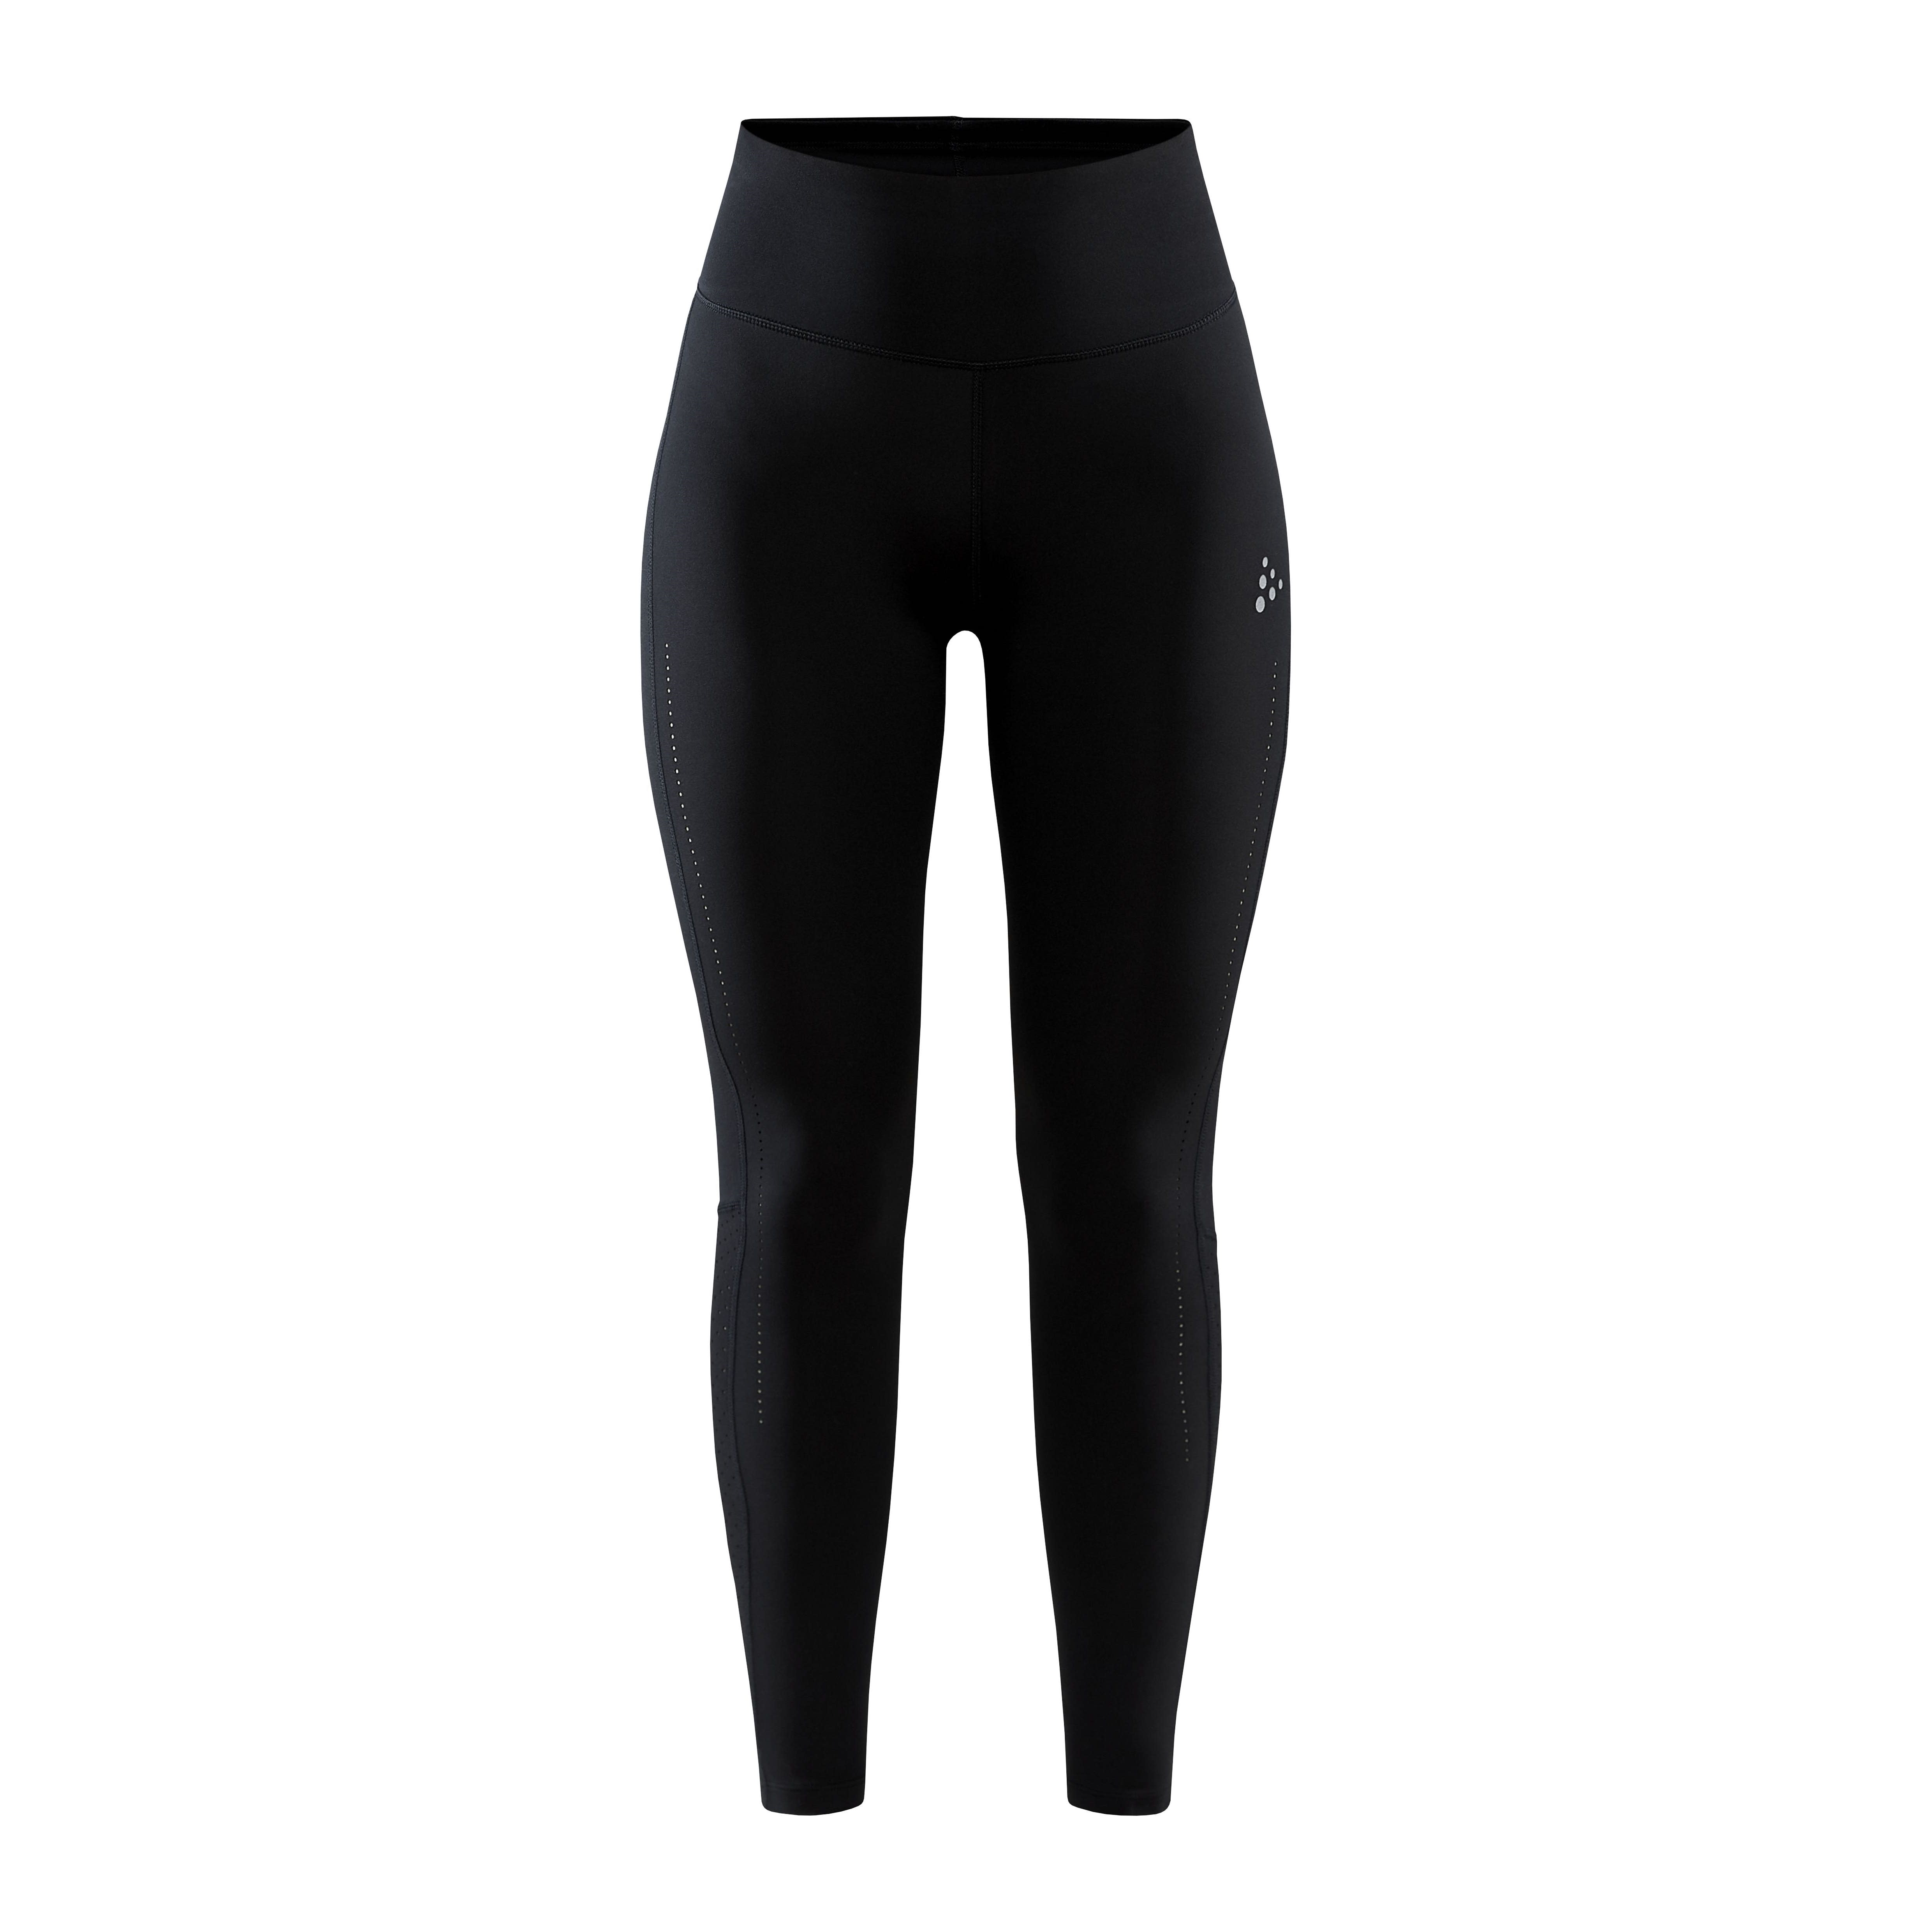 Women's Adv Charge Perforated Tights Black